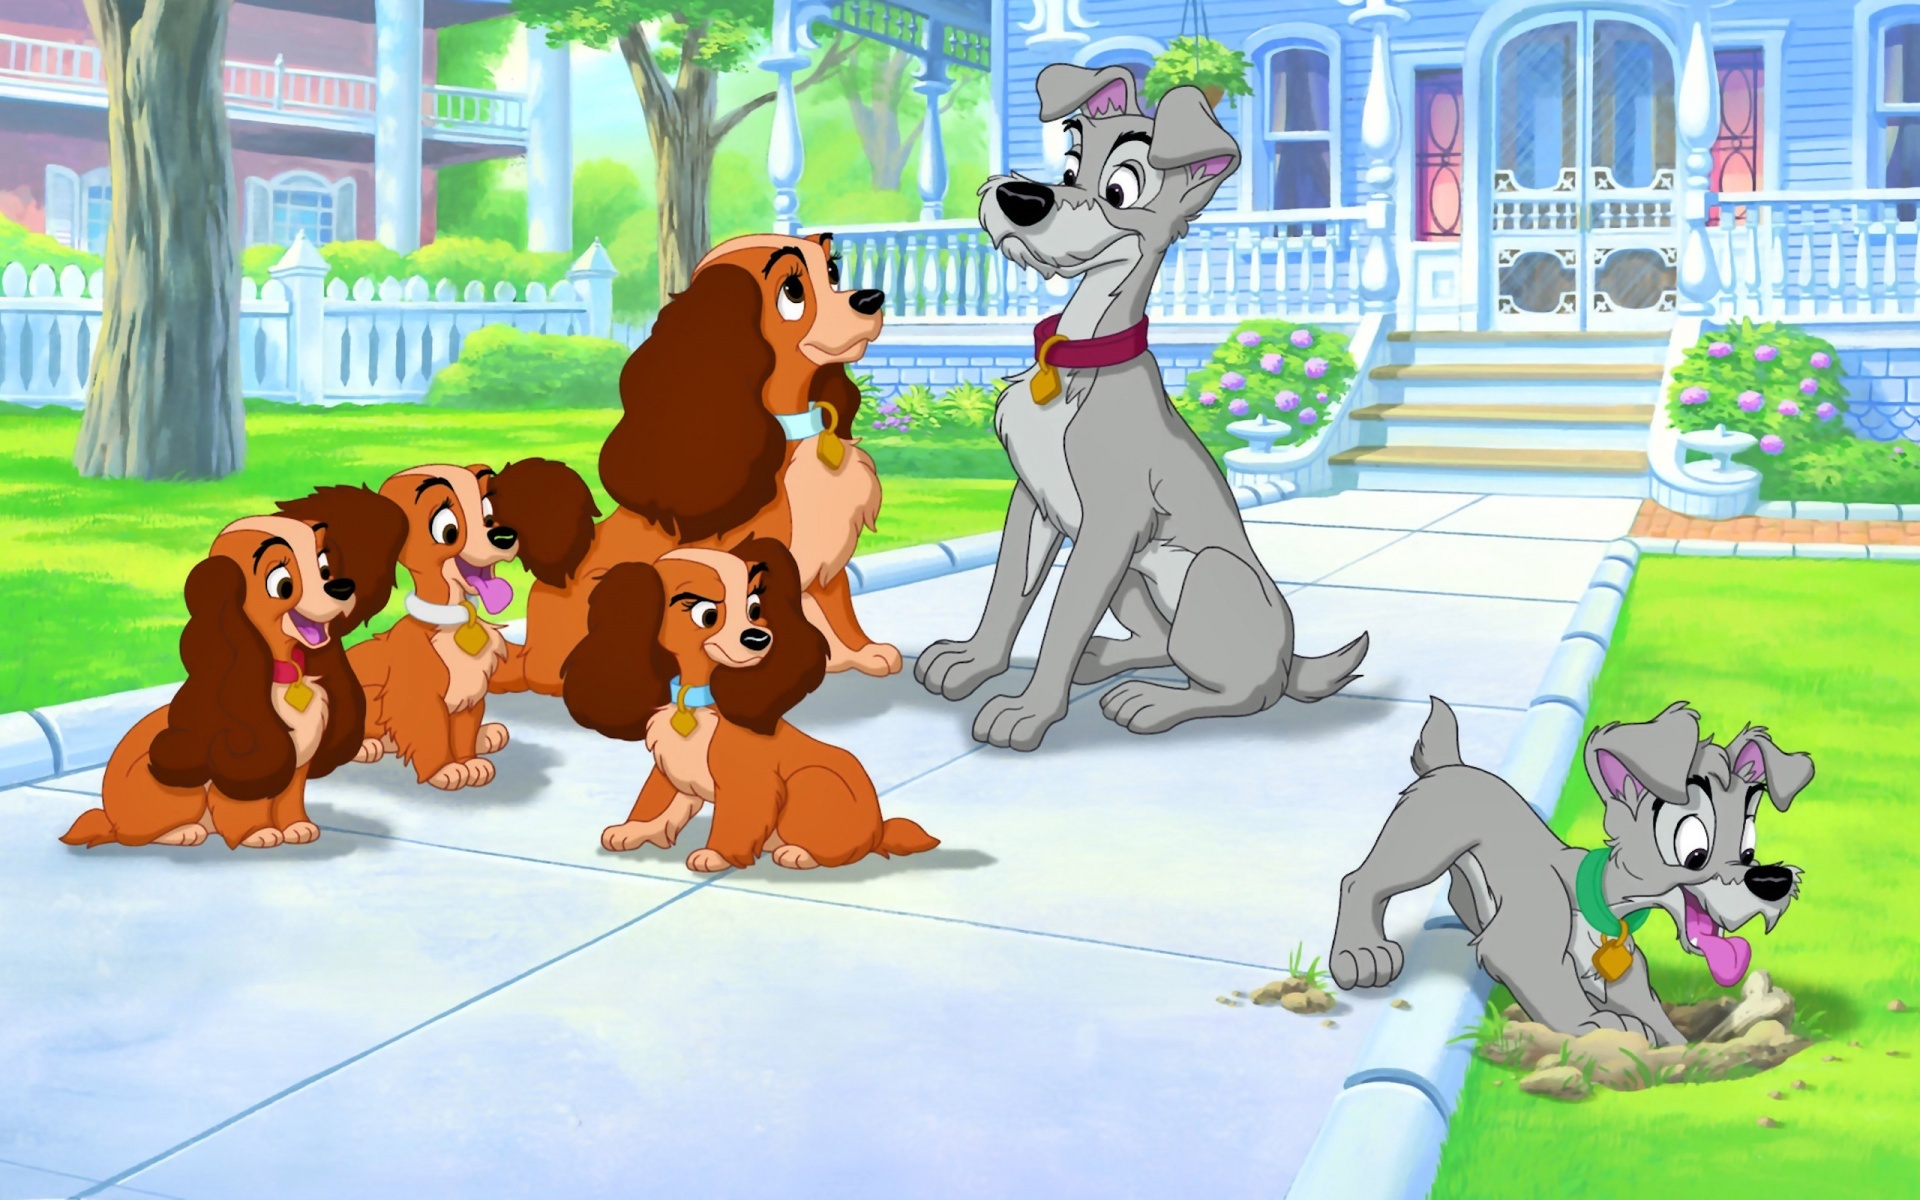 Lady and the Tramp, Scamp's adventure, Sequel wallpapers, Disney magic, 1920x1200 HD Desktop